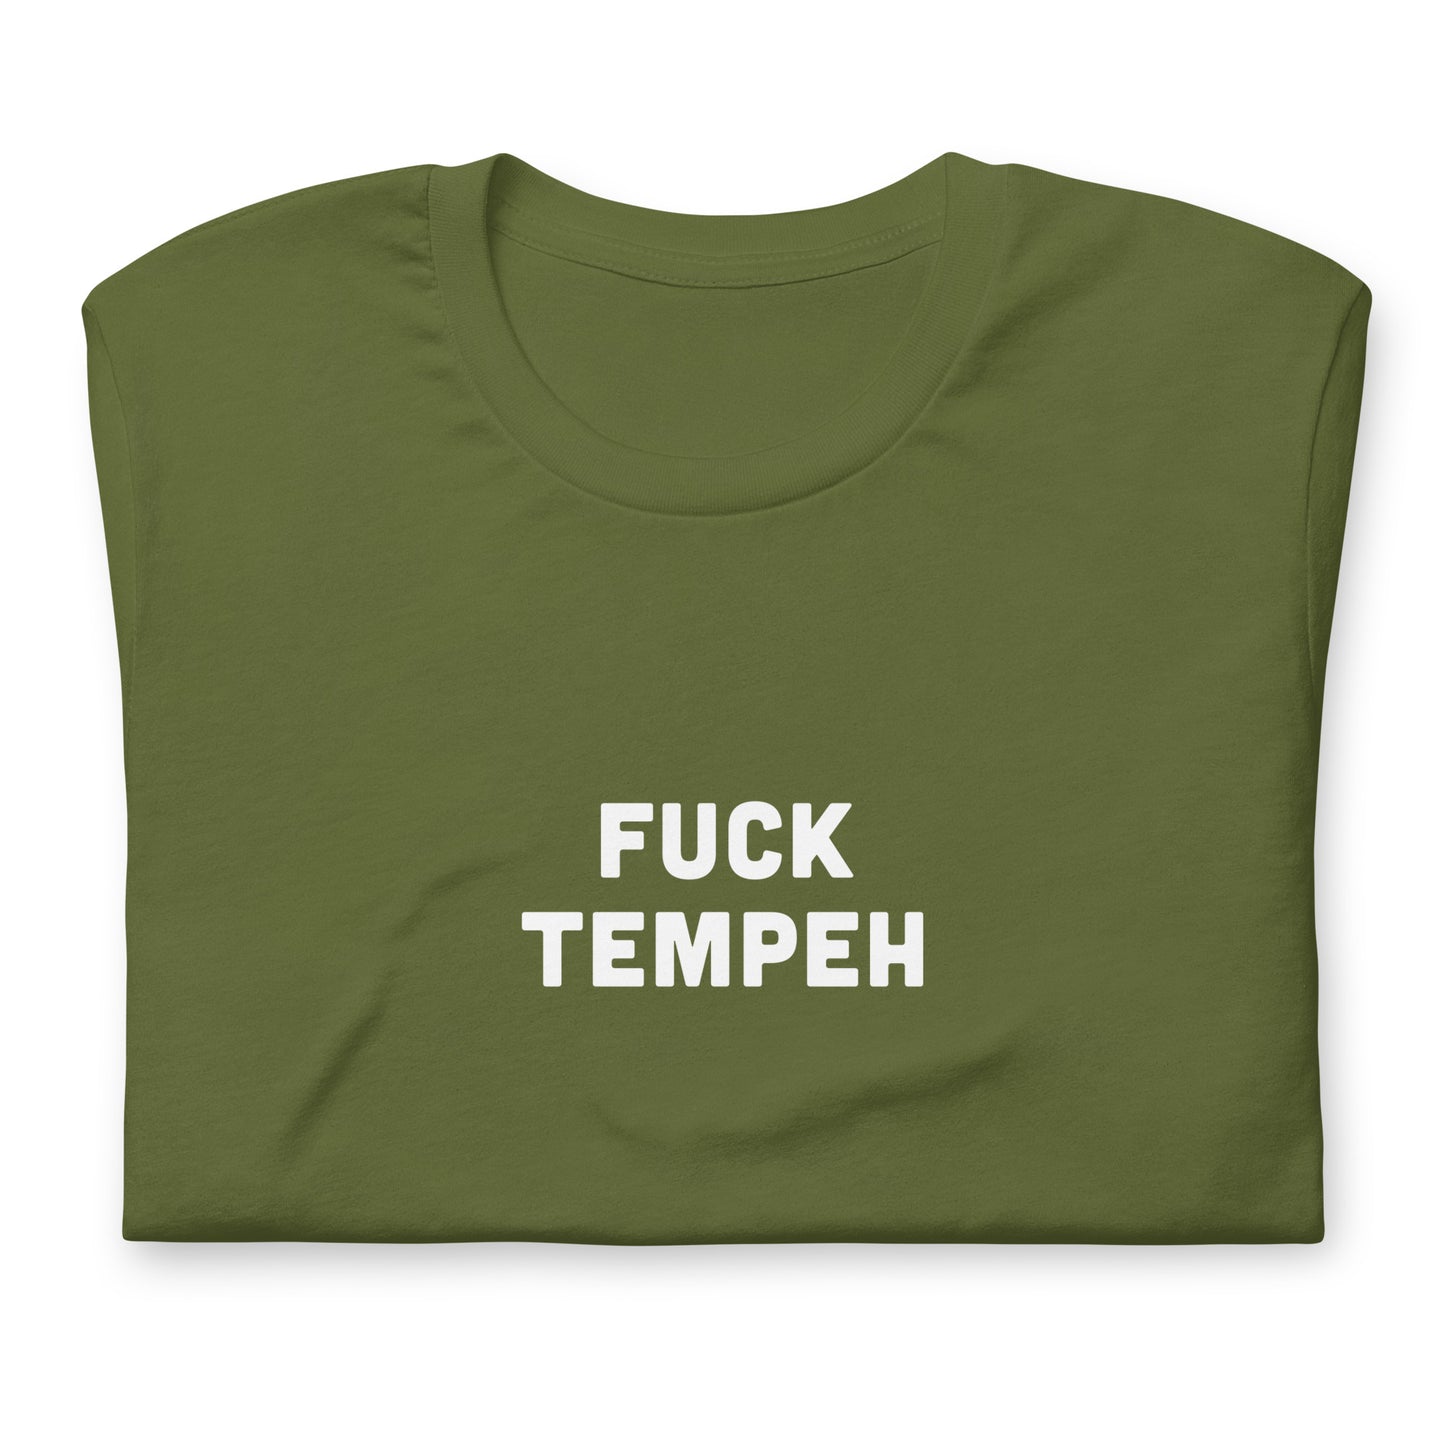 Fuck Tempeh T-Shirt Size S Color Navy